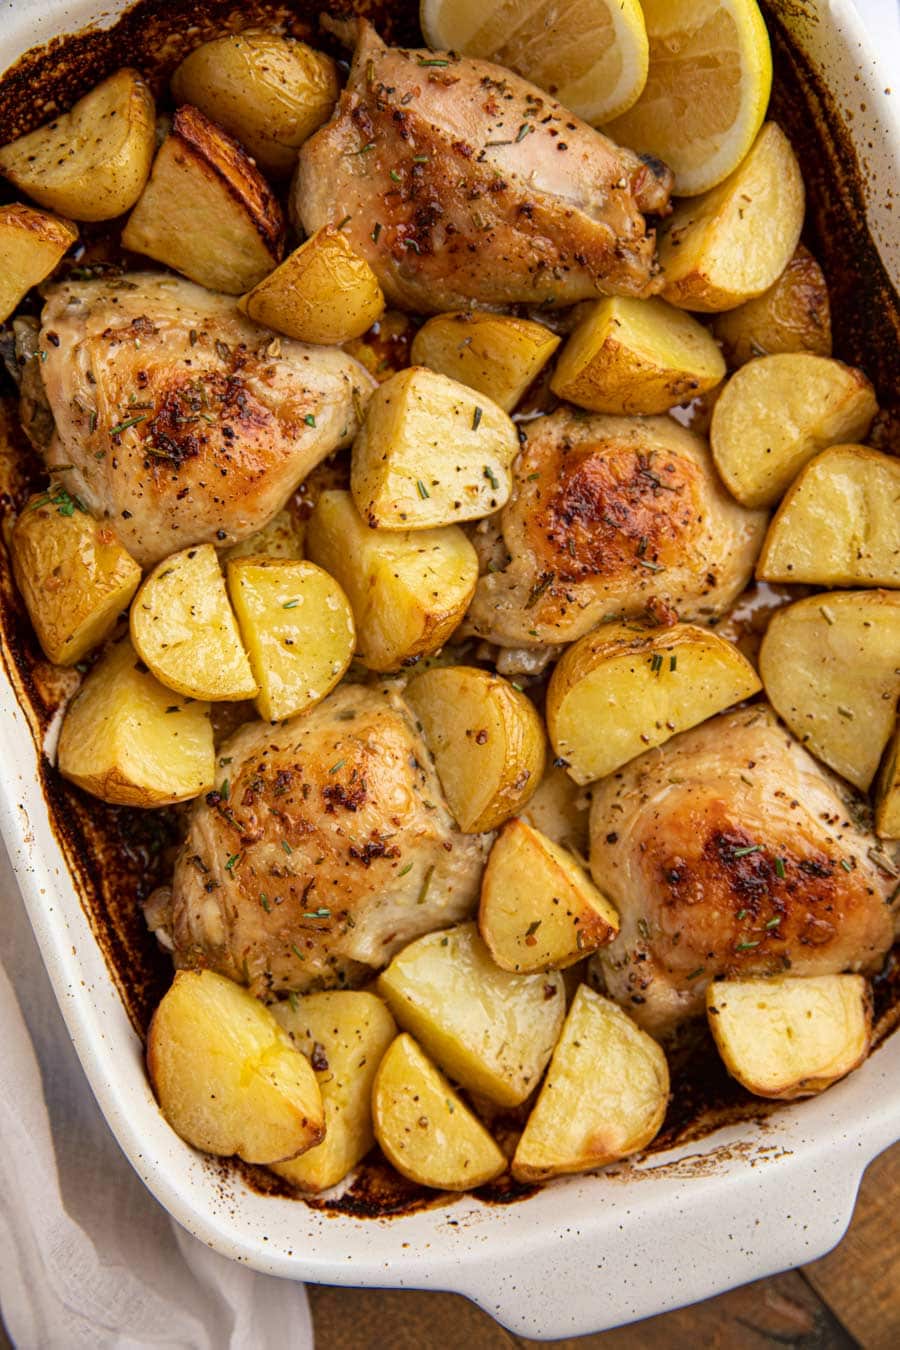 Baked Rosemary Chicken and Potatoes